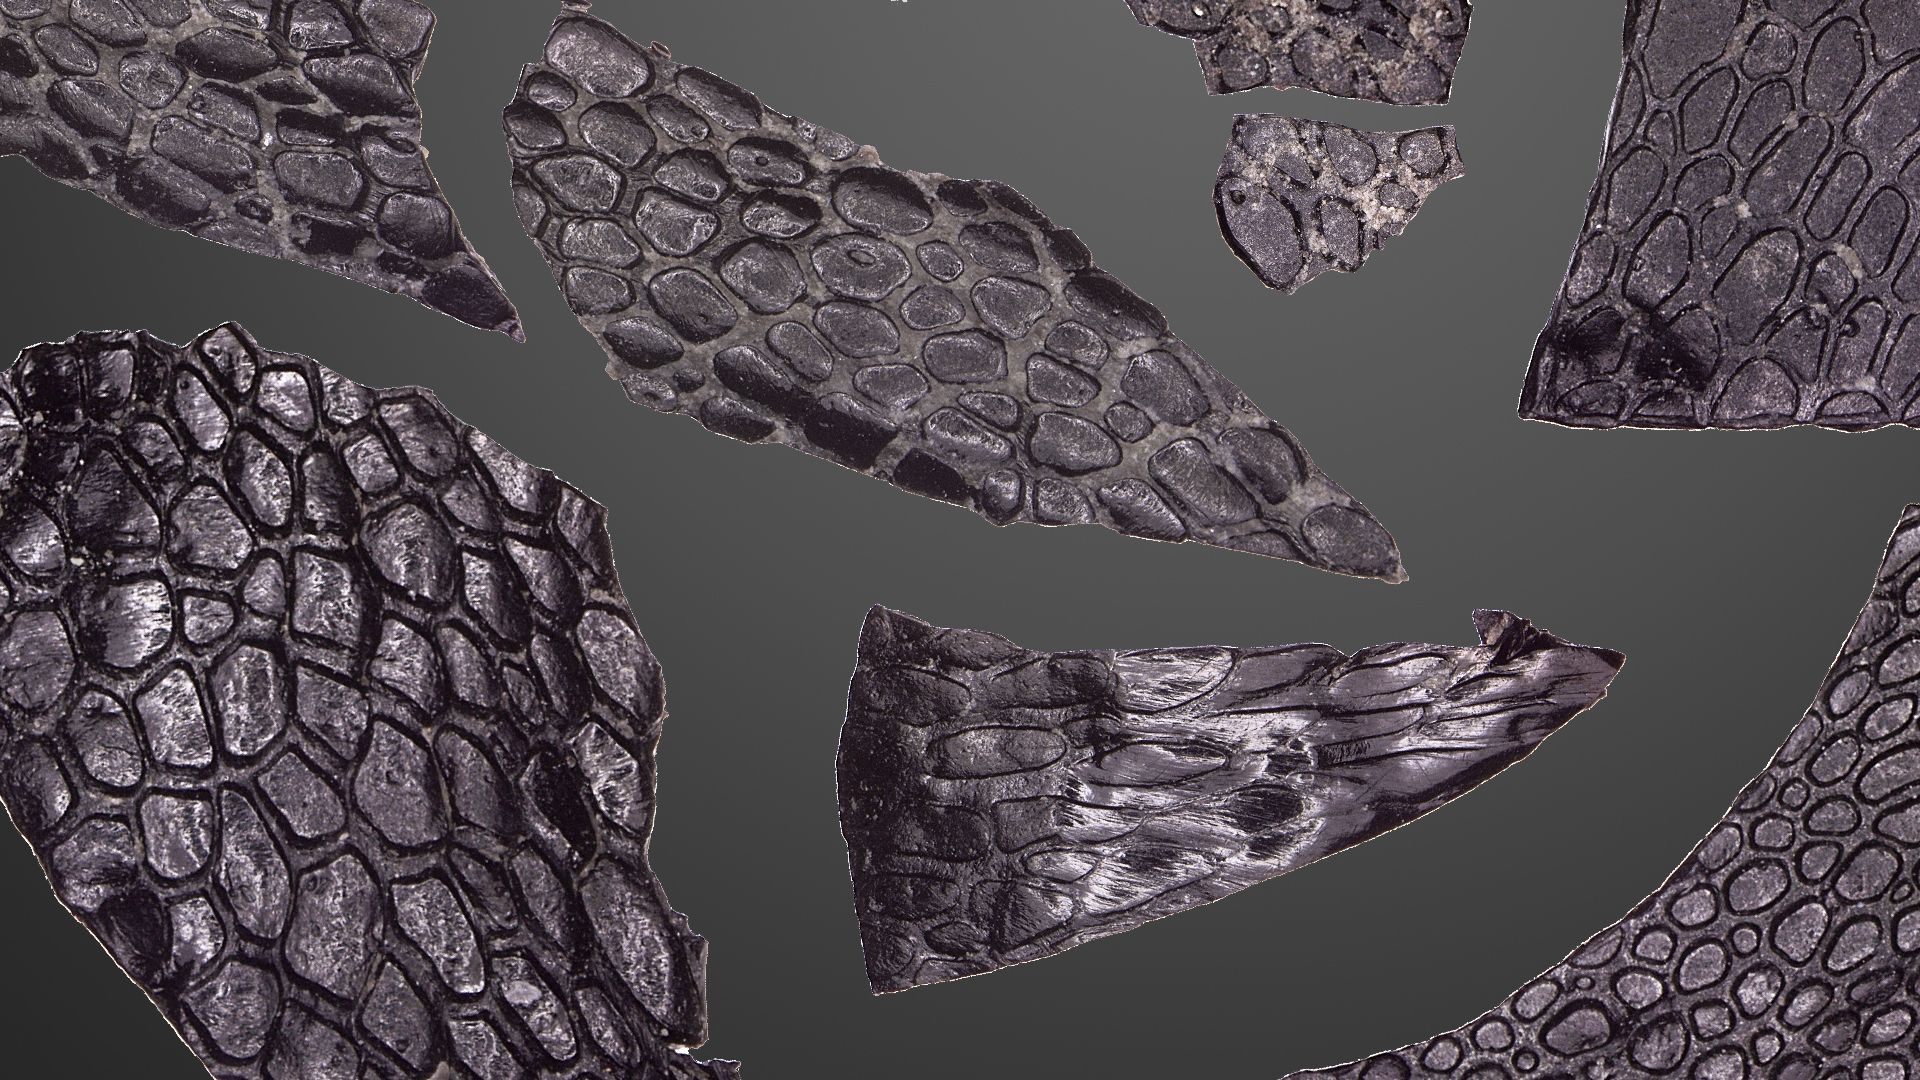 Images of sections of fossilized skin